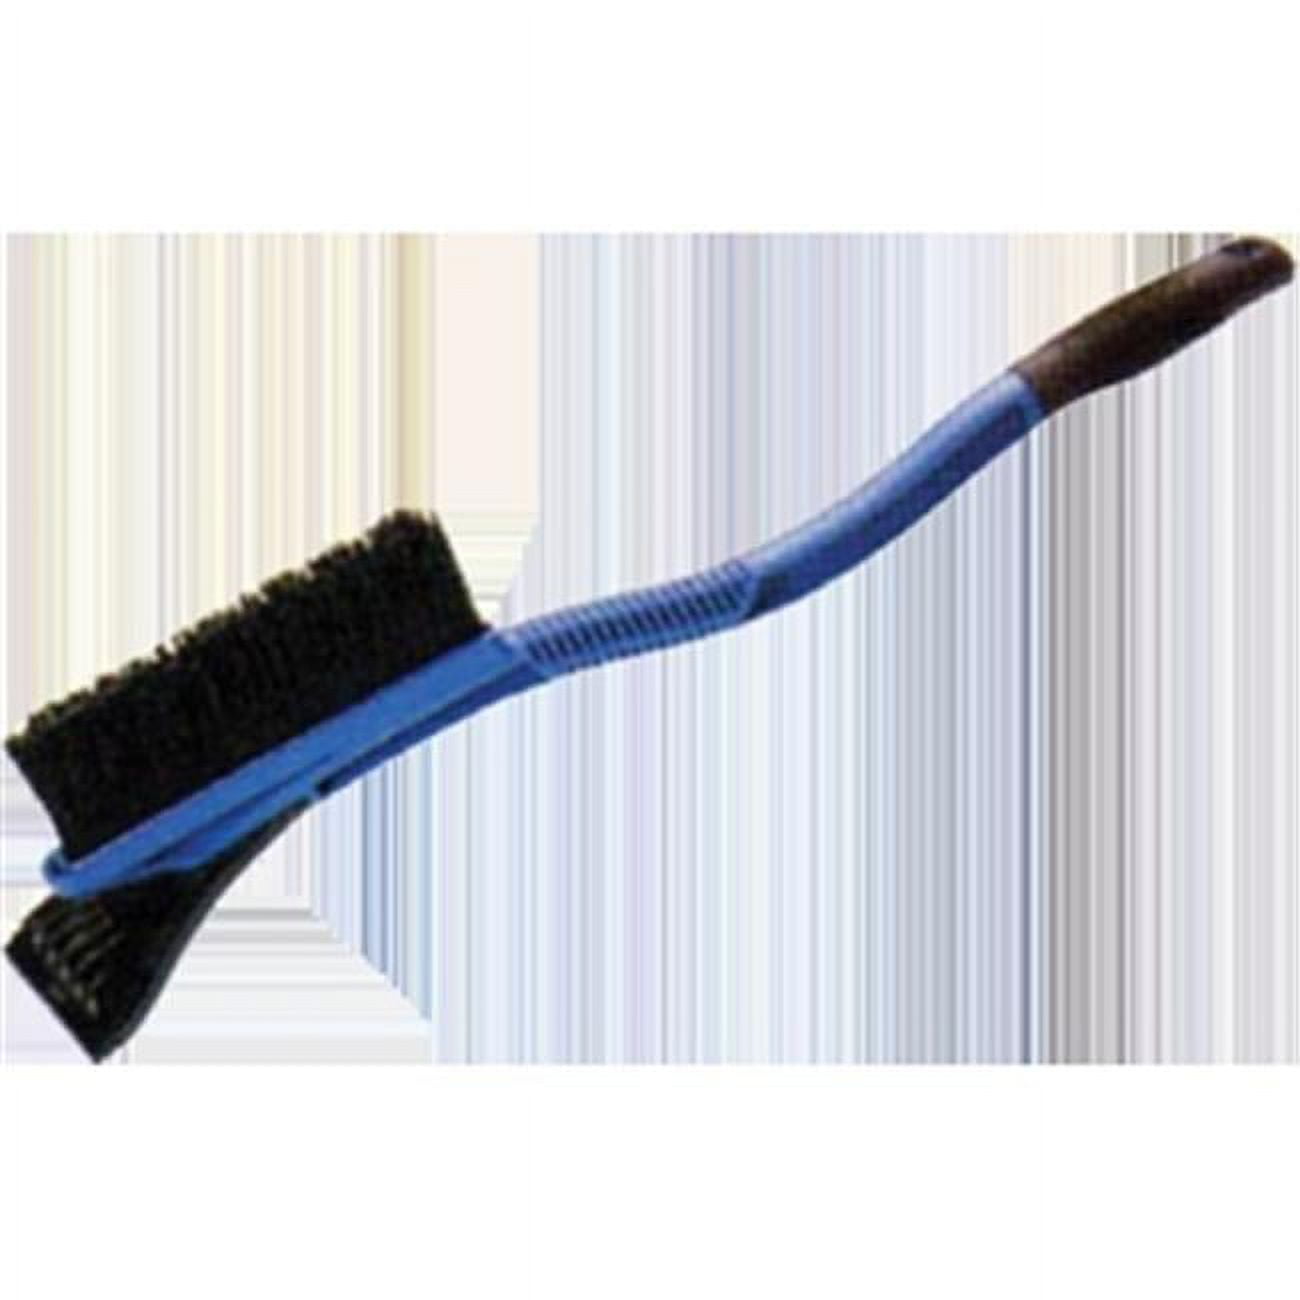 Hopkins 16511 Snow Brush, 23 Inch Overall Length: Ice Scrapers & Snow  Brushes (079976165112-1)